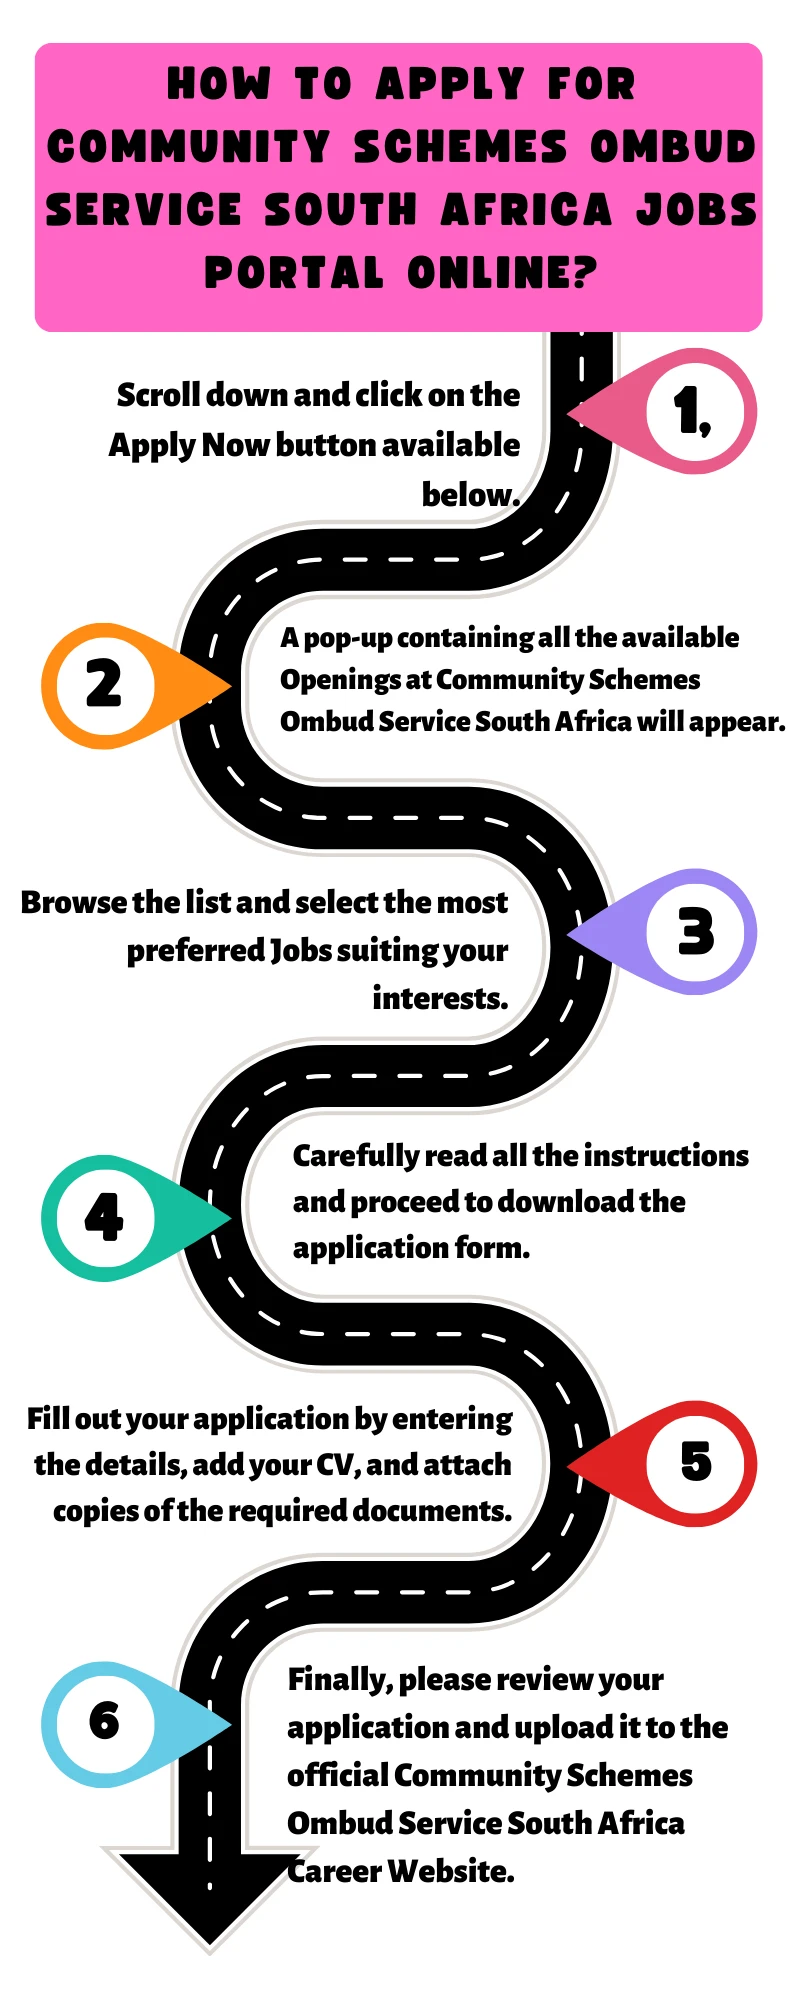 How To Apply for Community Schemes Ombud Service South Africa Jobs Portal Online?